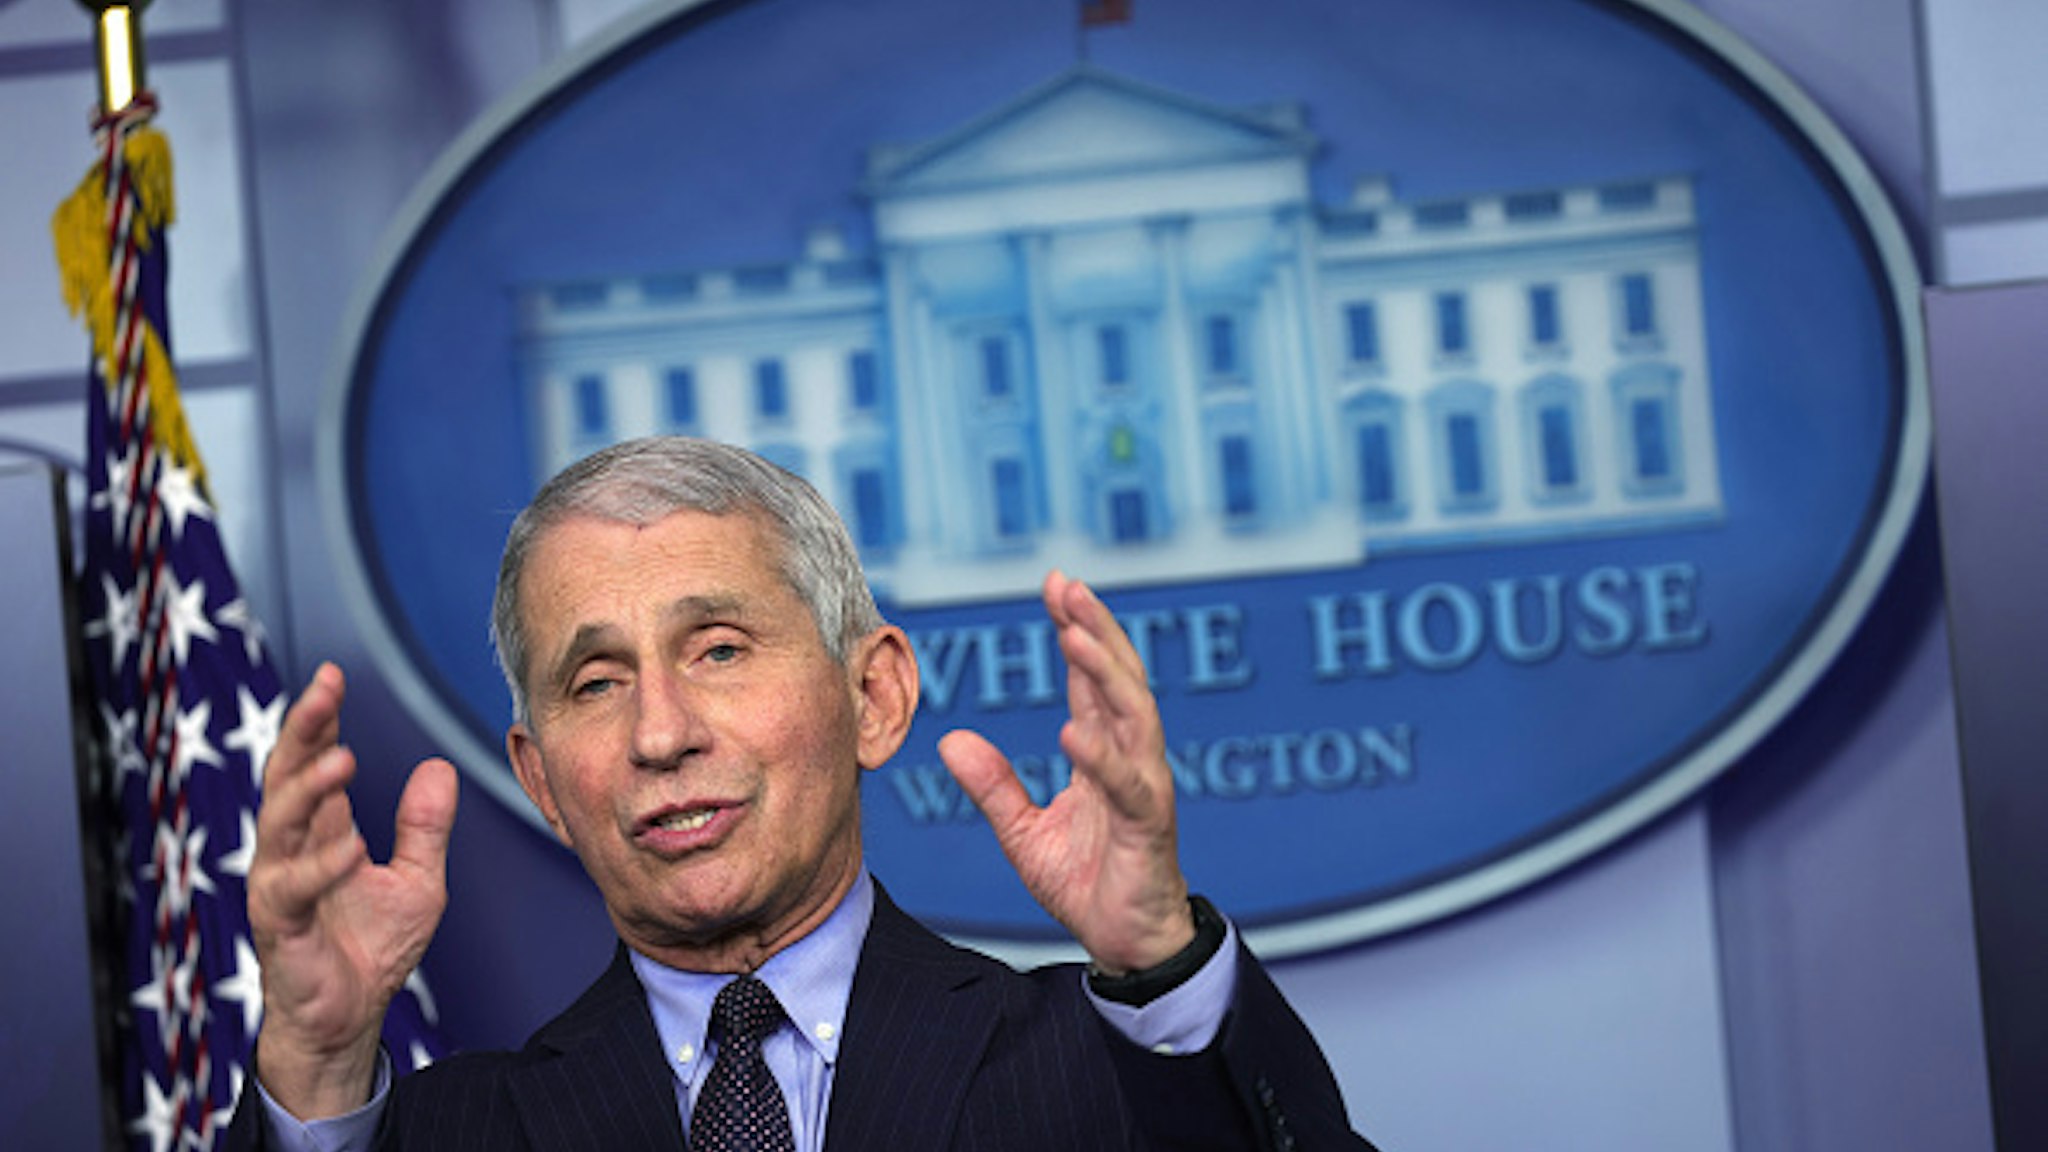 WASHINGTON, DC - JANUARY 21: Dr Anthony Fauci, Director of the National Institute of Allergy and Infectious Diseases, speaks during a White House press briefing, conducted by White House Press Secretary Jen Psaki, at the James Brady Press Briefing Room of the White House January 21, 2021 in Washington, DC. Psaki held her second press briefing since President Joe Biden took office yesterday.